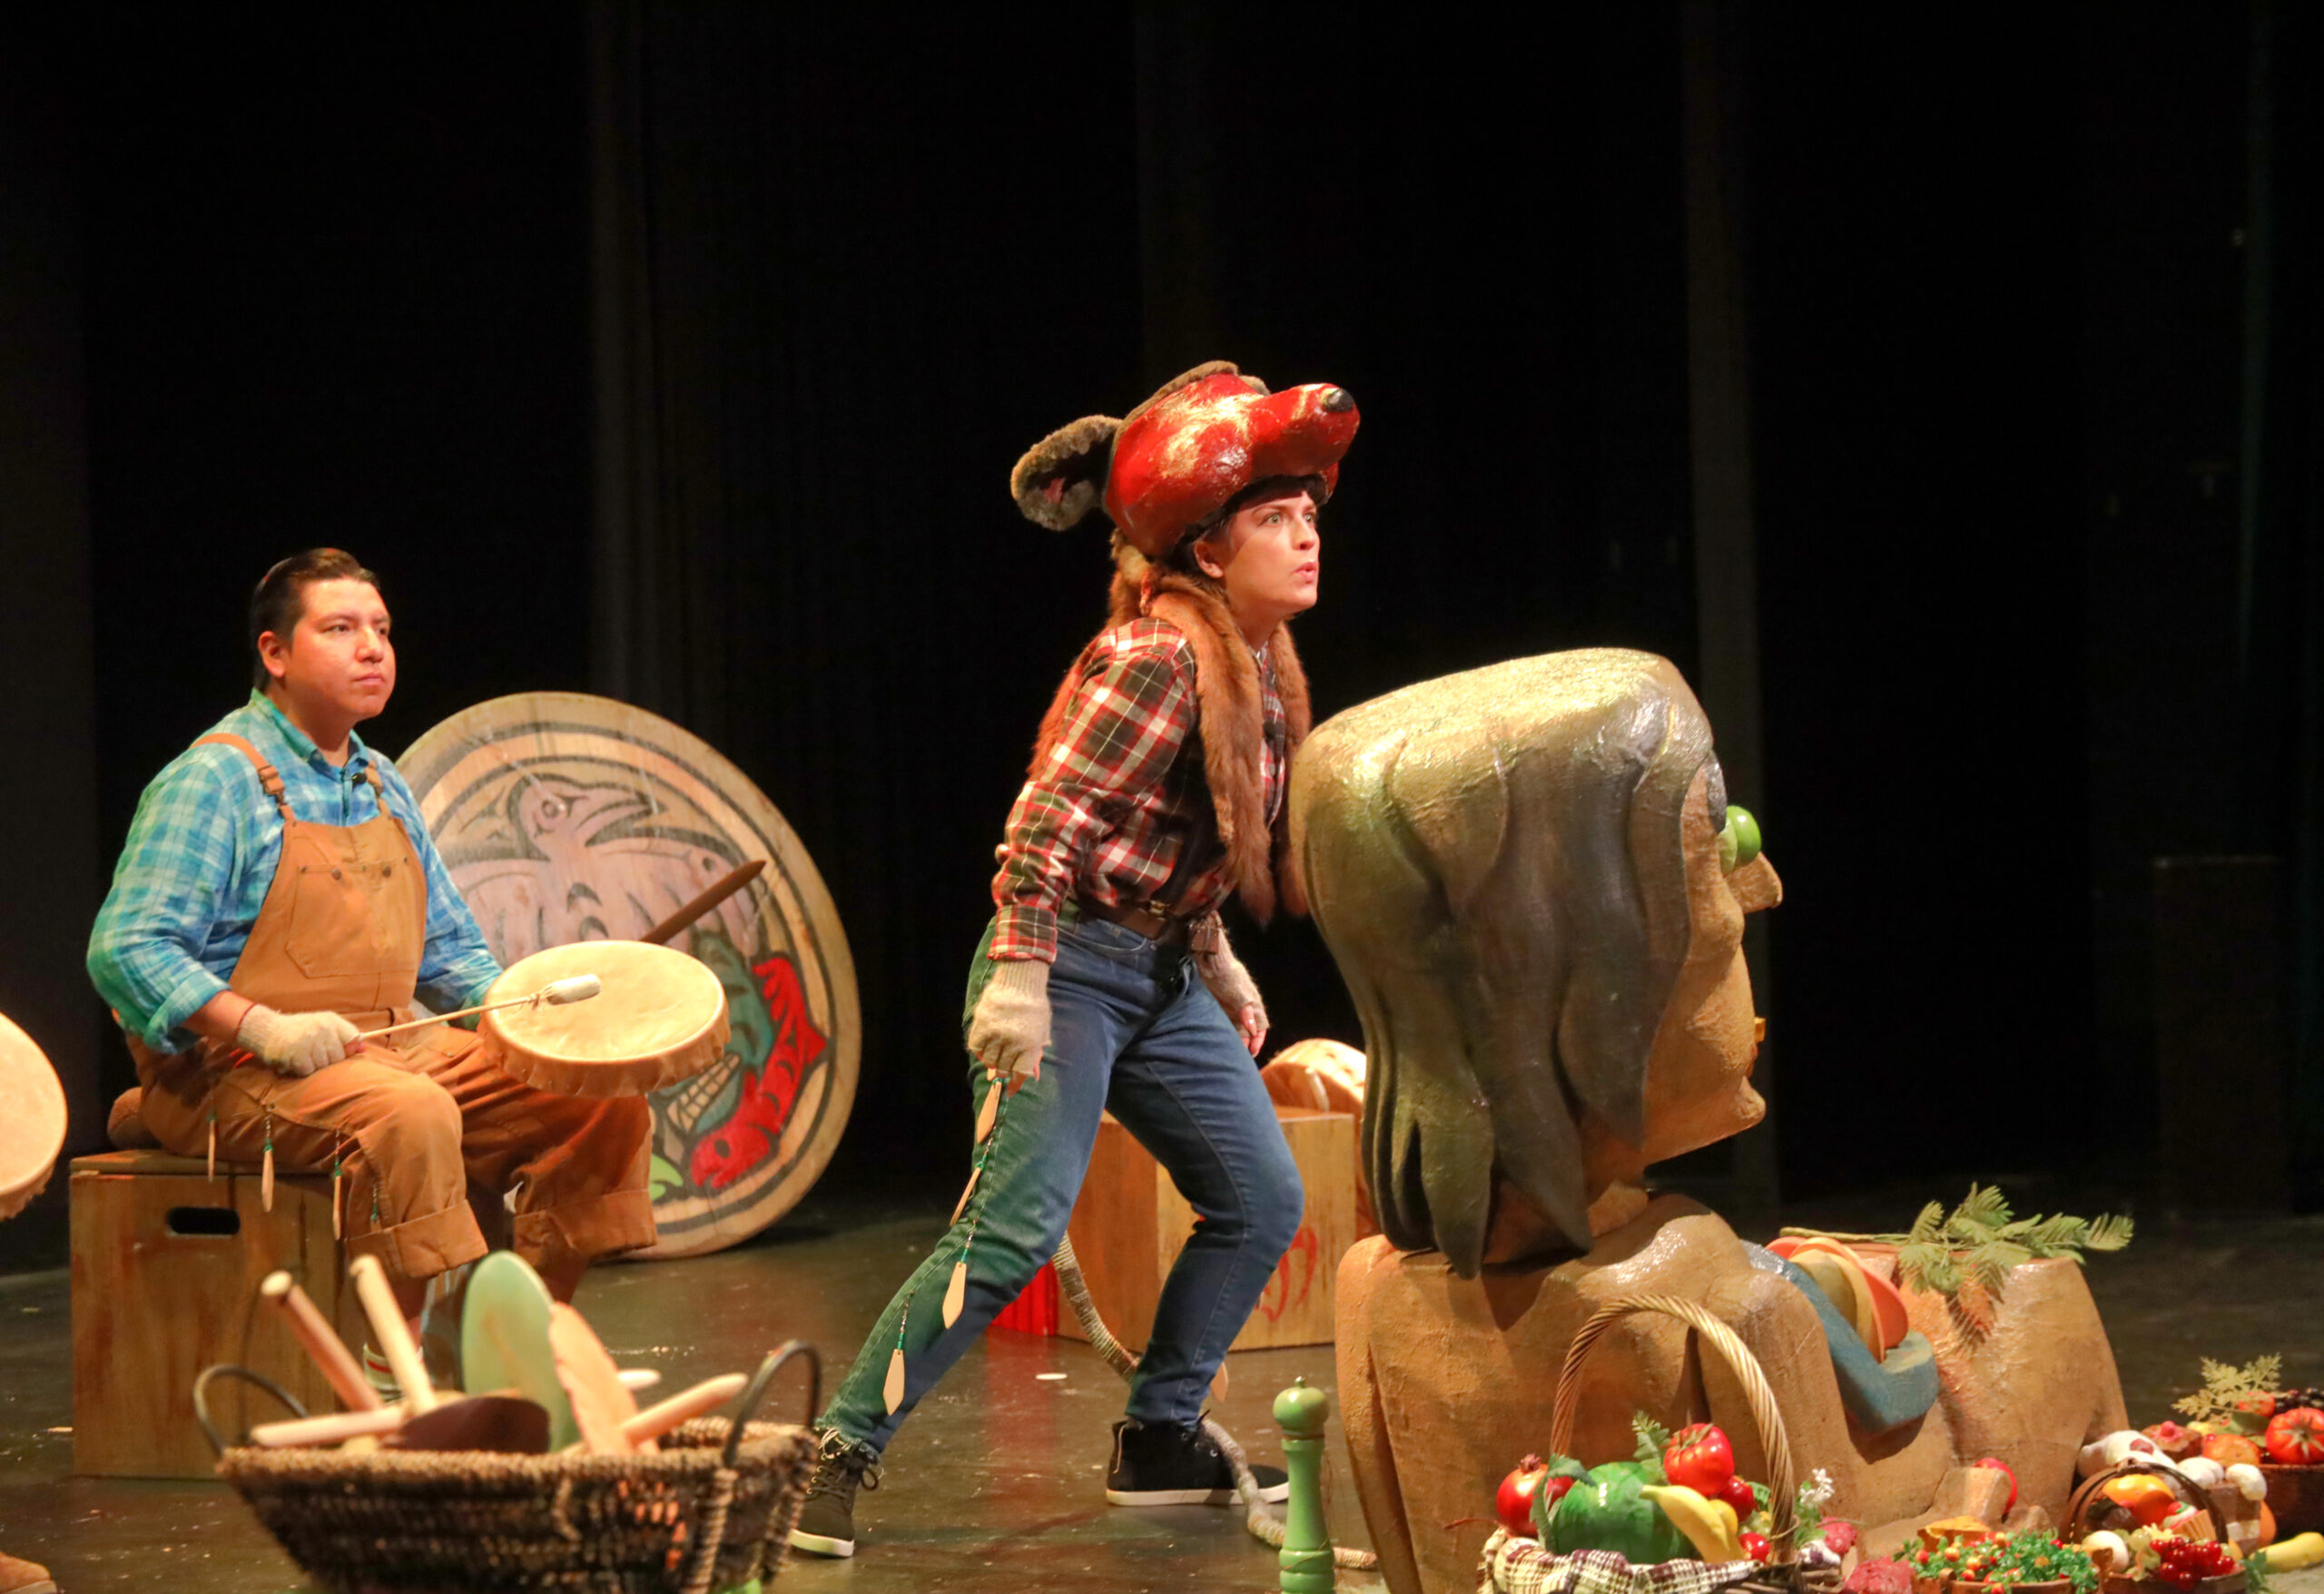 Kids and parents alike wowed by indigenous tale at Kids & Co. show